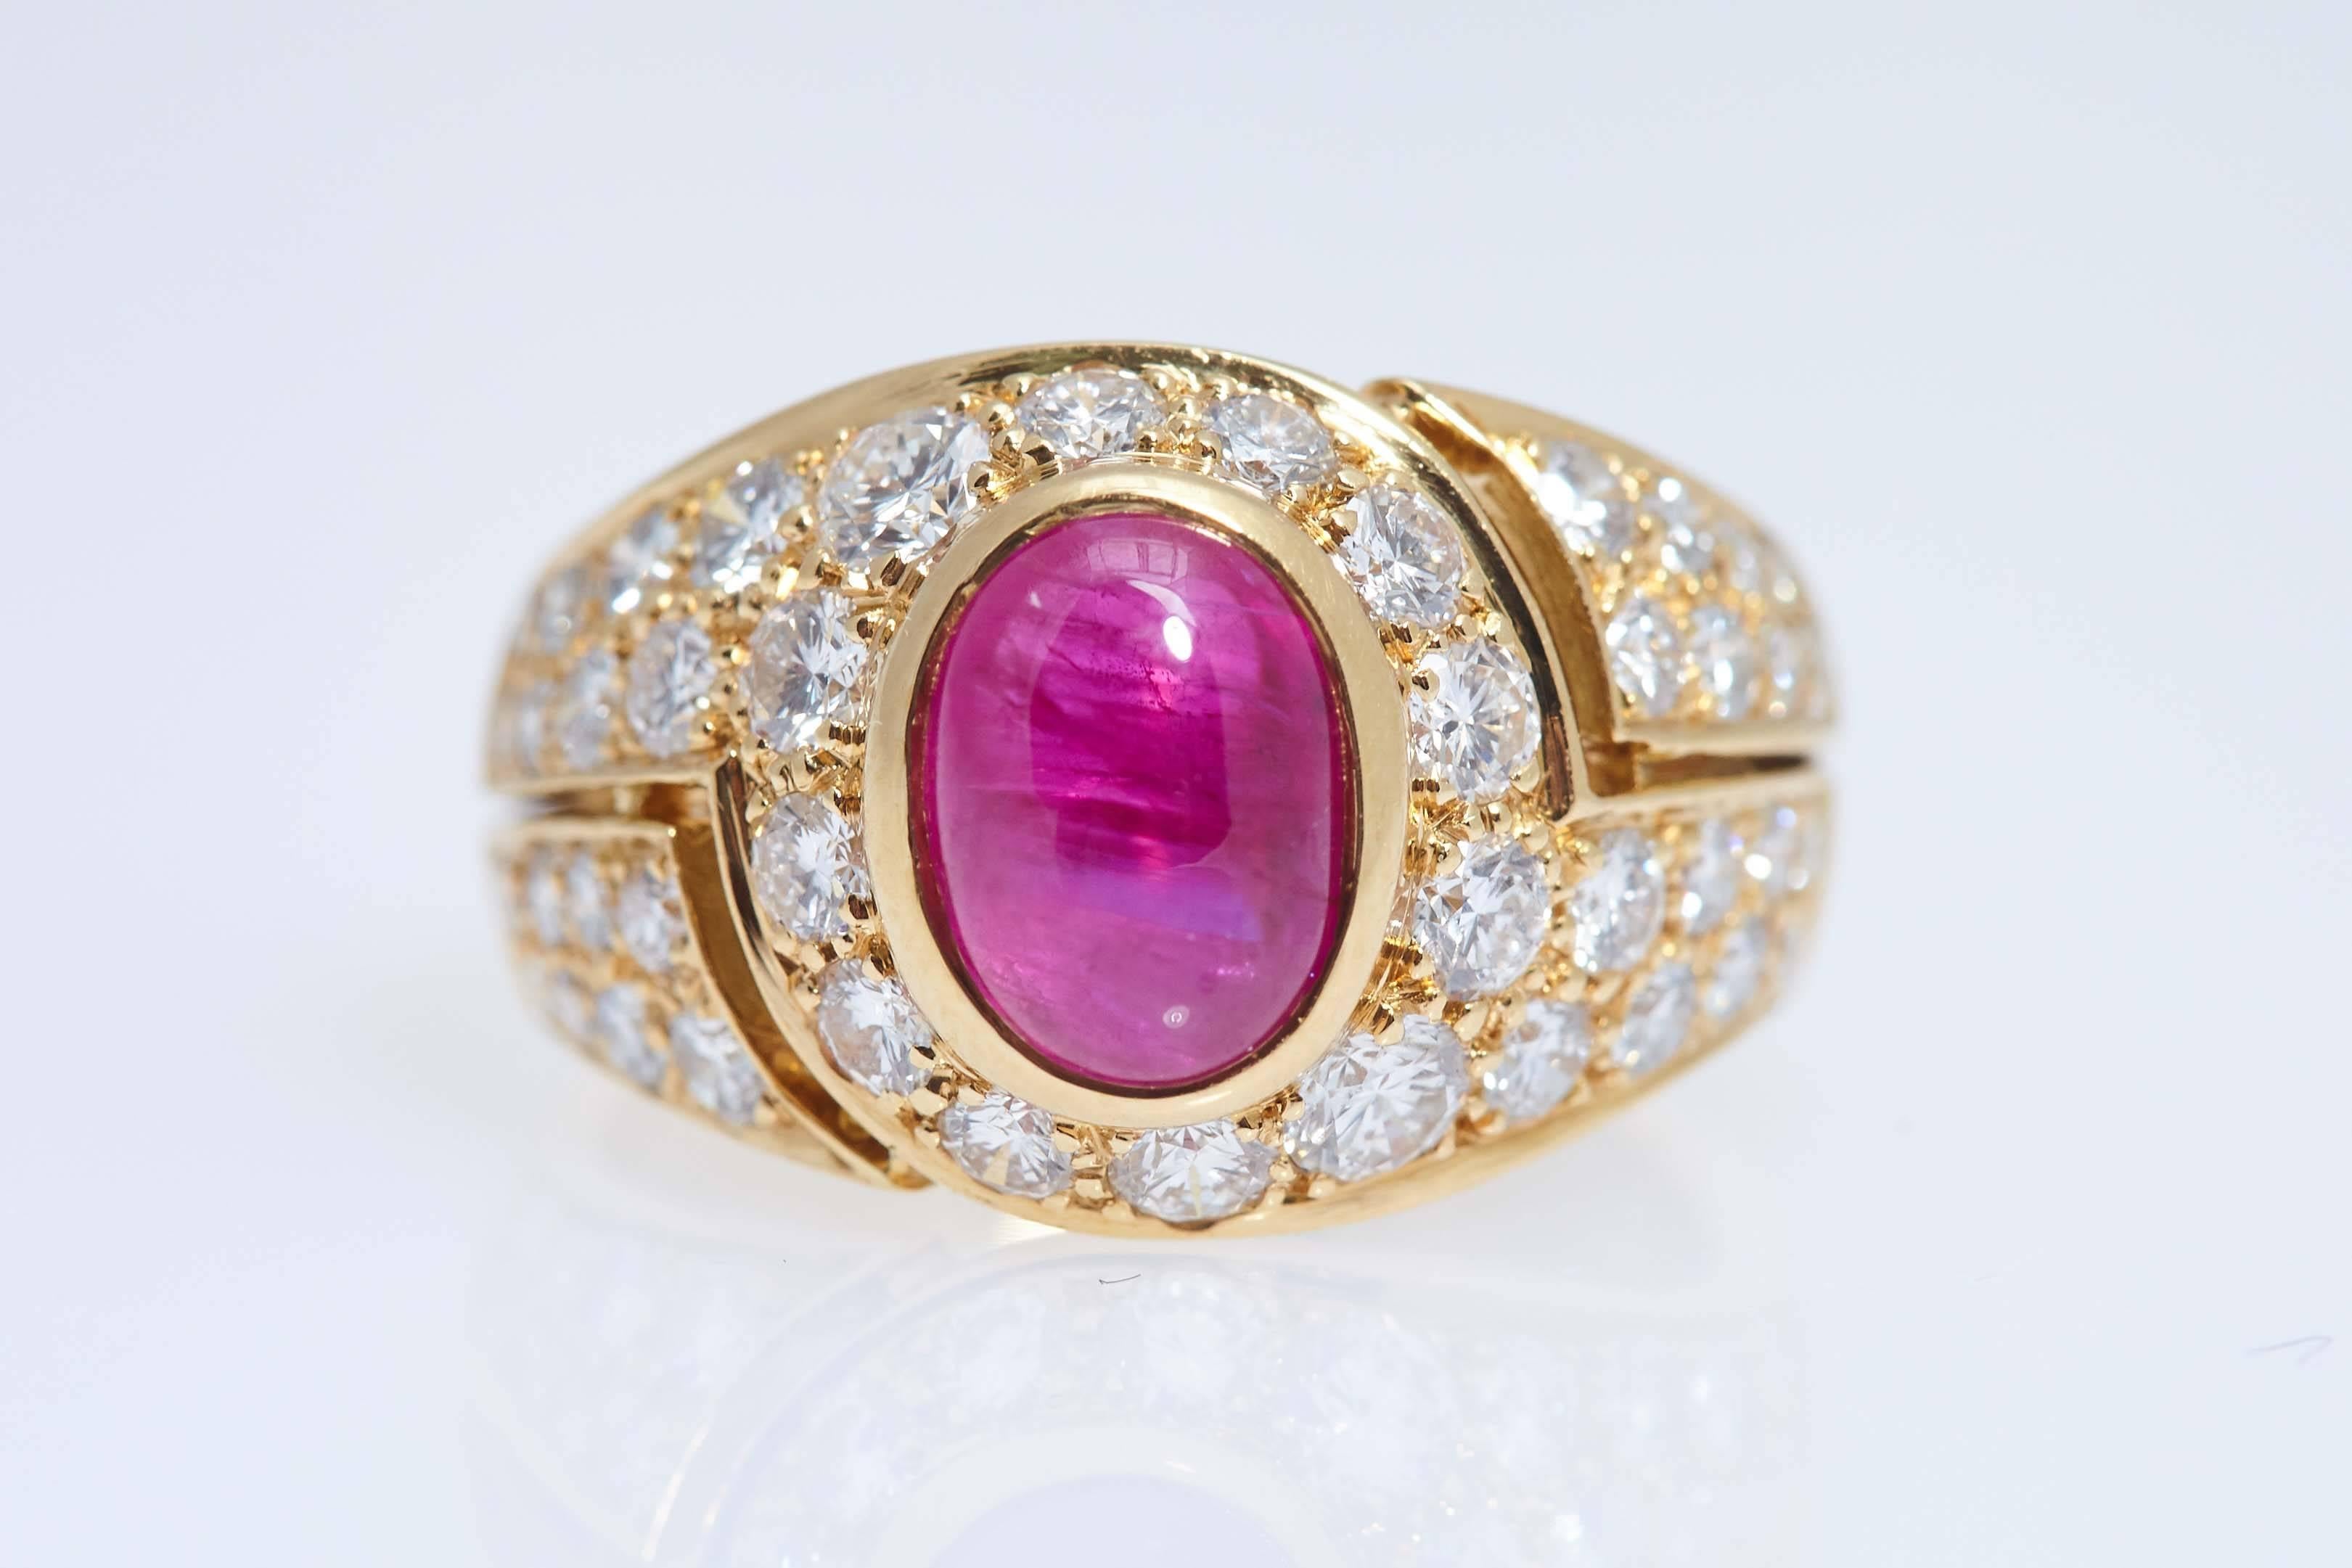 Bulgari Burma Cabochon Ruby, Diamond, 18 karat yellow gold ring. The ruby weighs approximately 2.00 carat and the 42 diamonds have a total weight of approximately .75 carat. The ring is stamped "Roma, BVLGARI, 750" and is size 4 3/4.